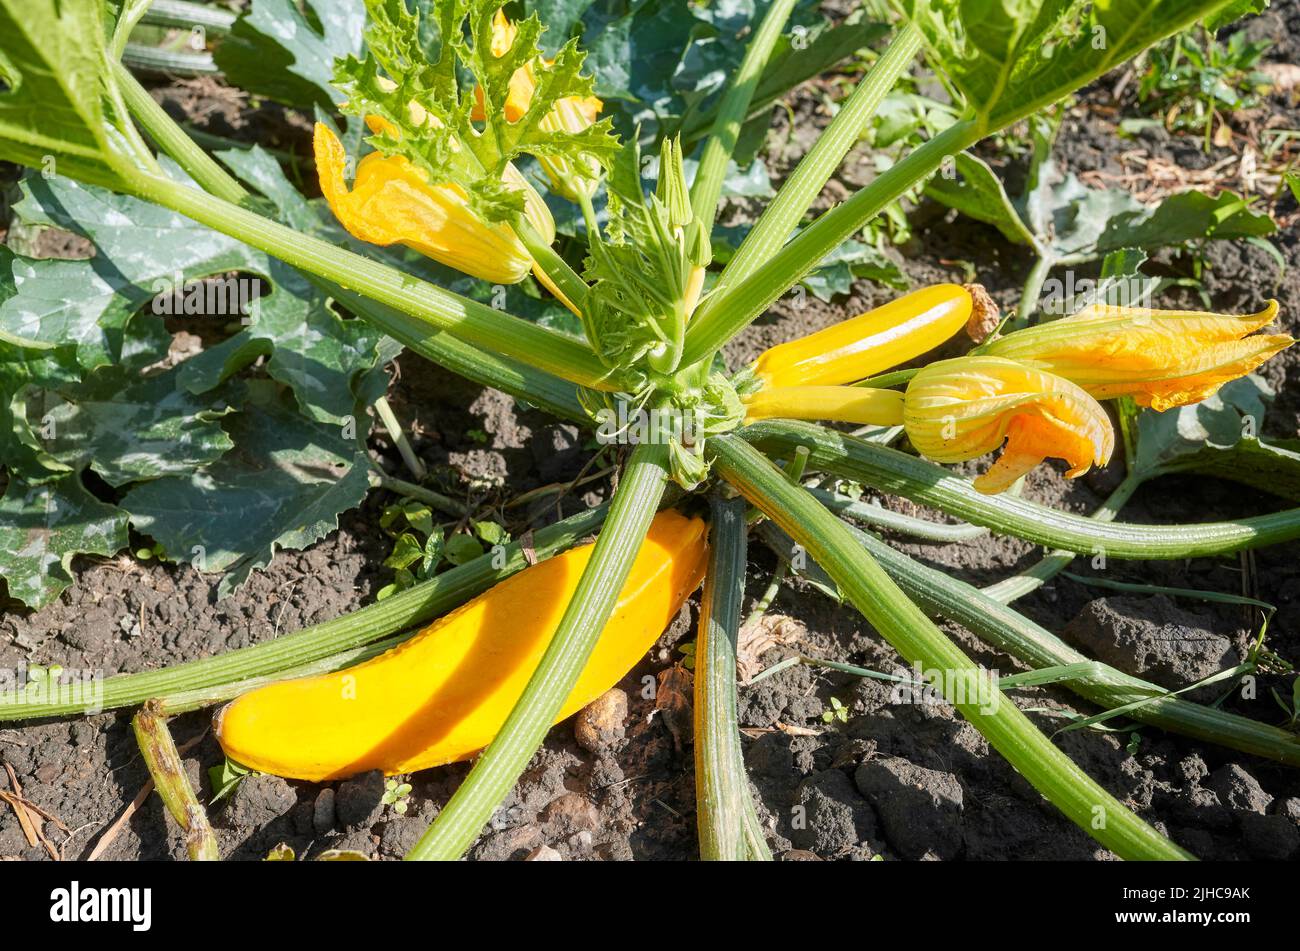 Organic golden zucchini plant with flowers and fruits, selective focus. Stock Photo